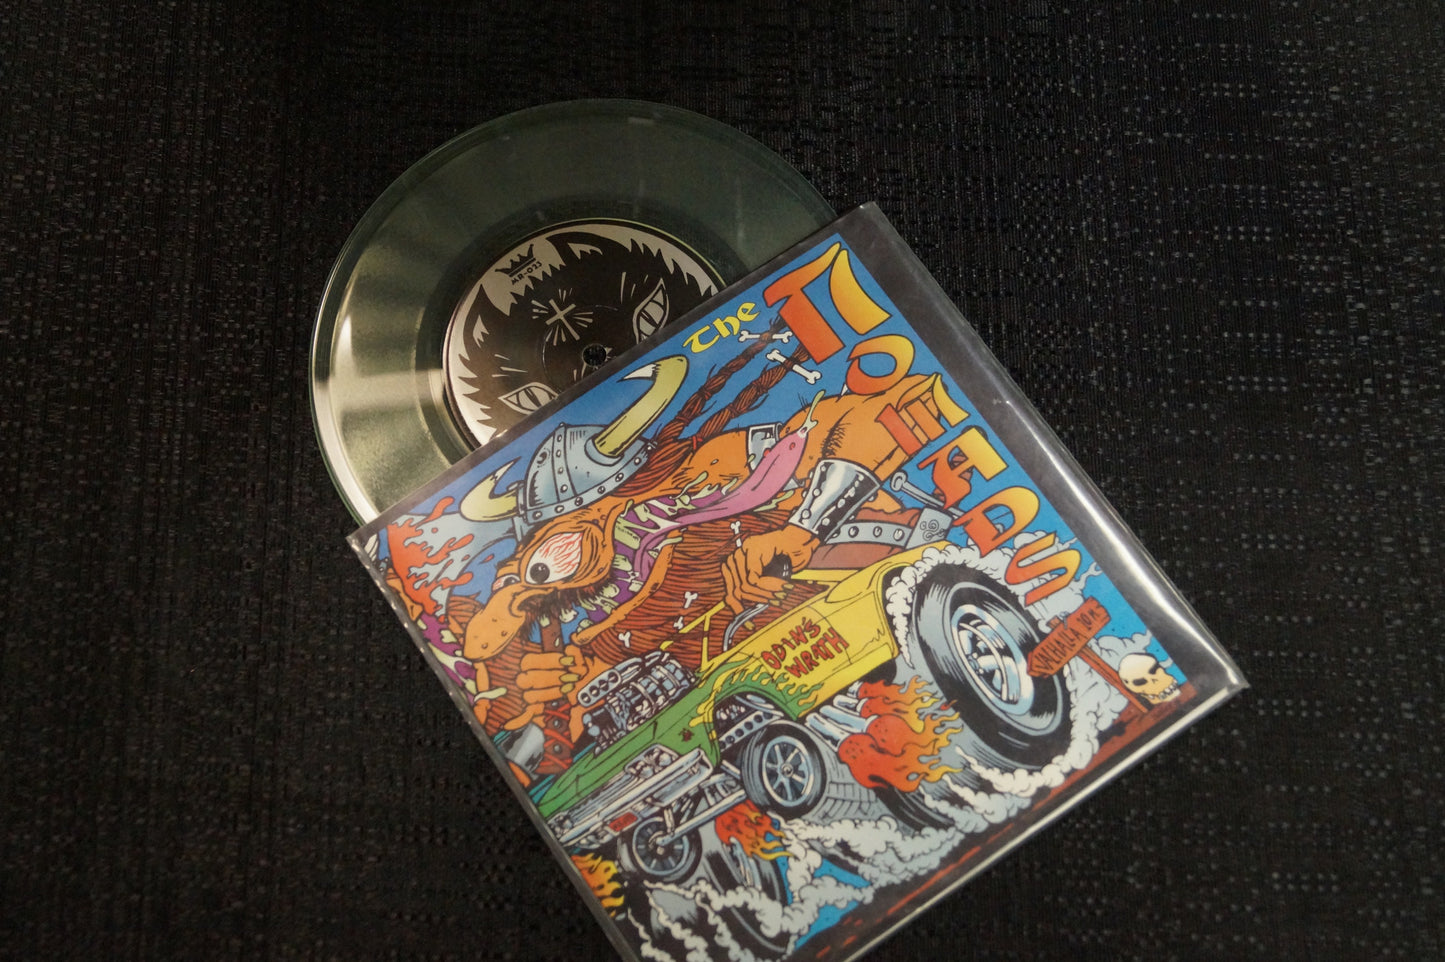 The Nomads "Iron Dream" 1996 Colored Vinyl Art By Kozik